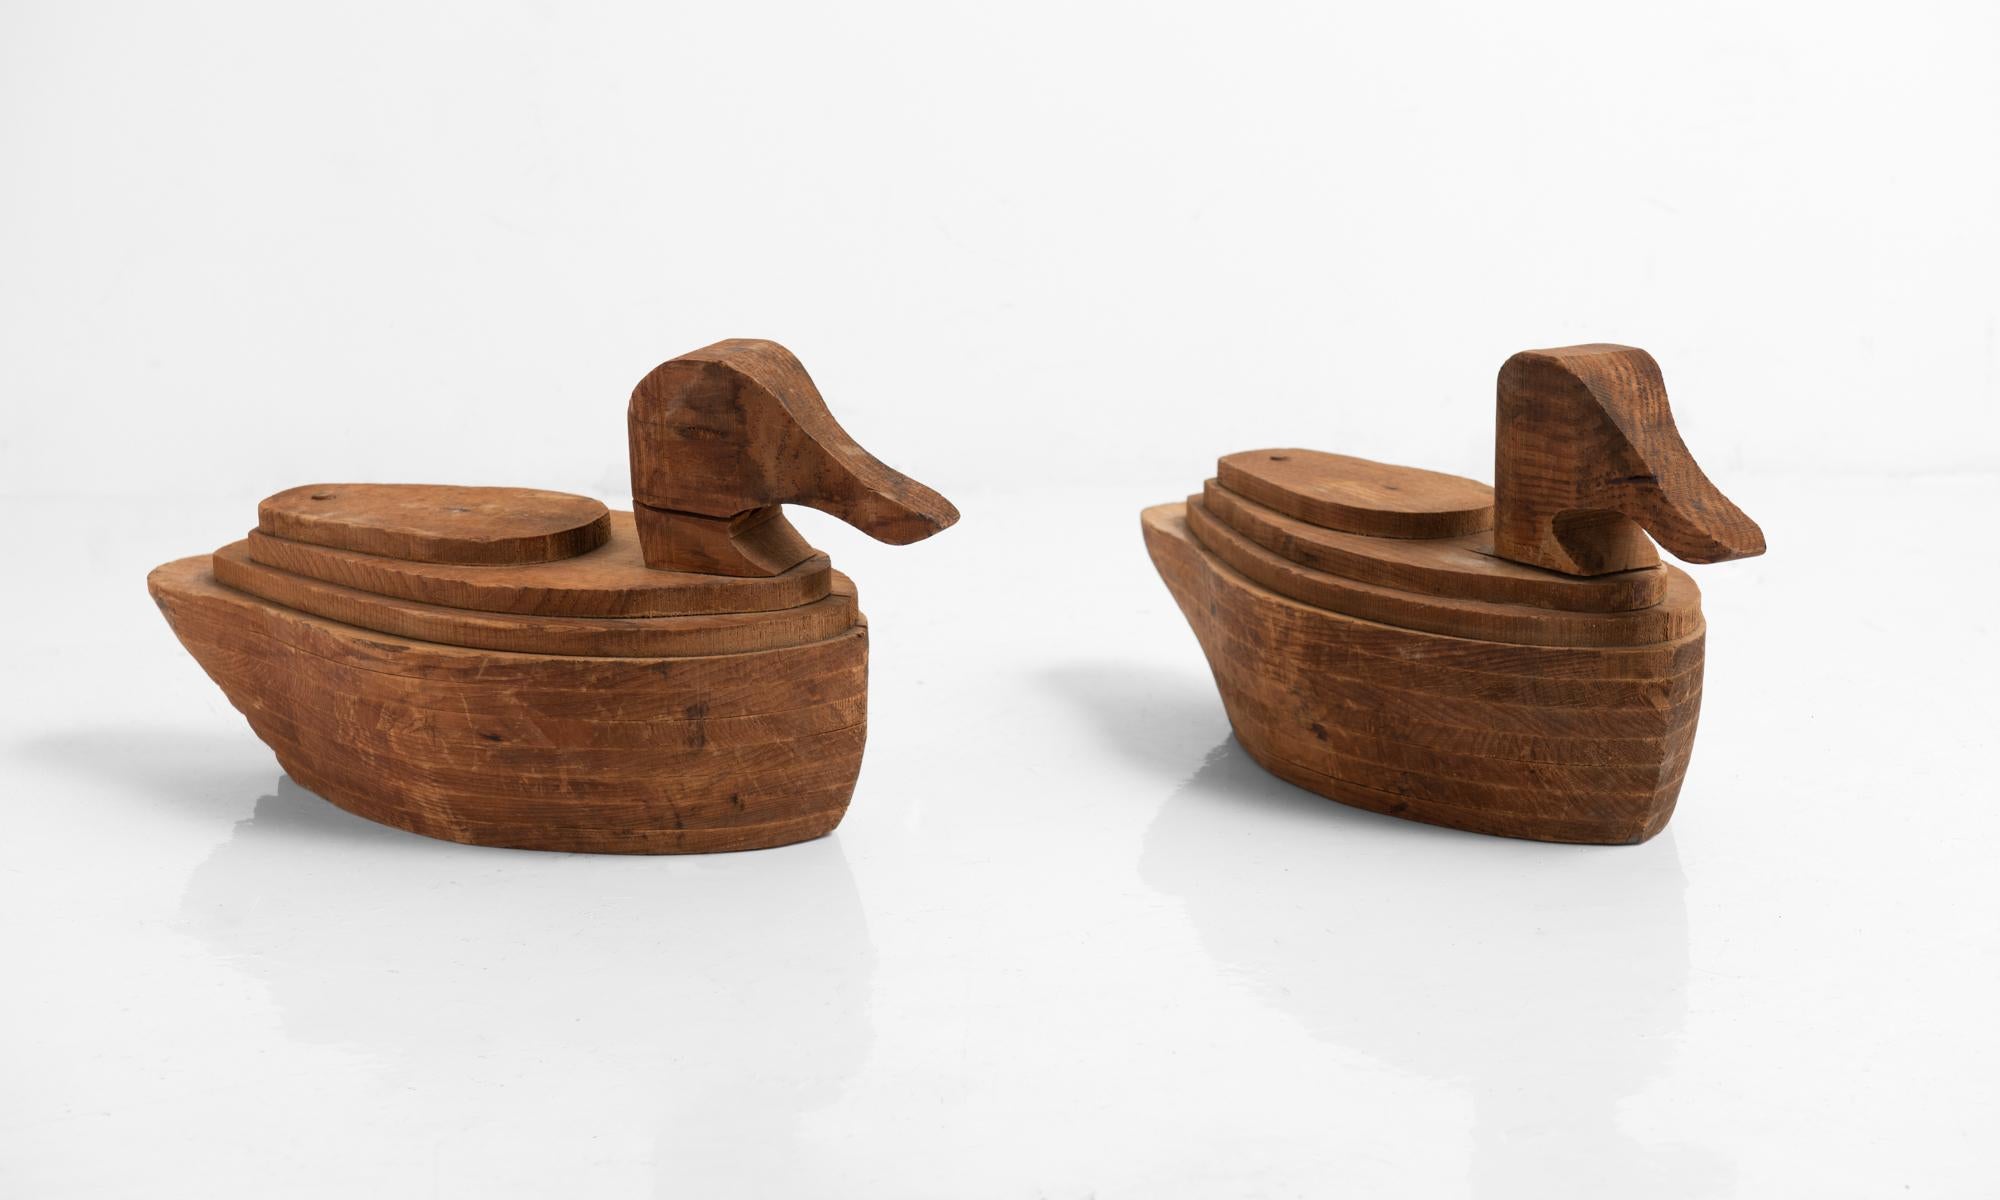 Abstract duck sculptures, circa 1930.

Unique forms constructed of cut wood to provide a unique, stacked effect.